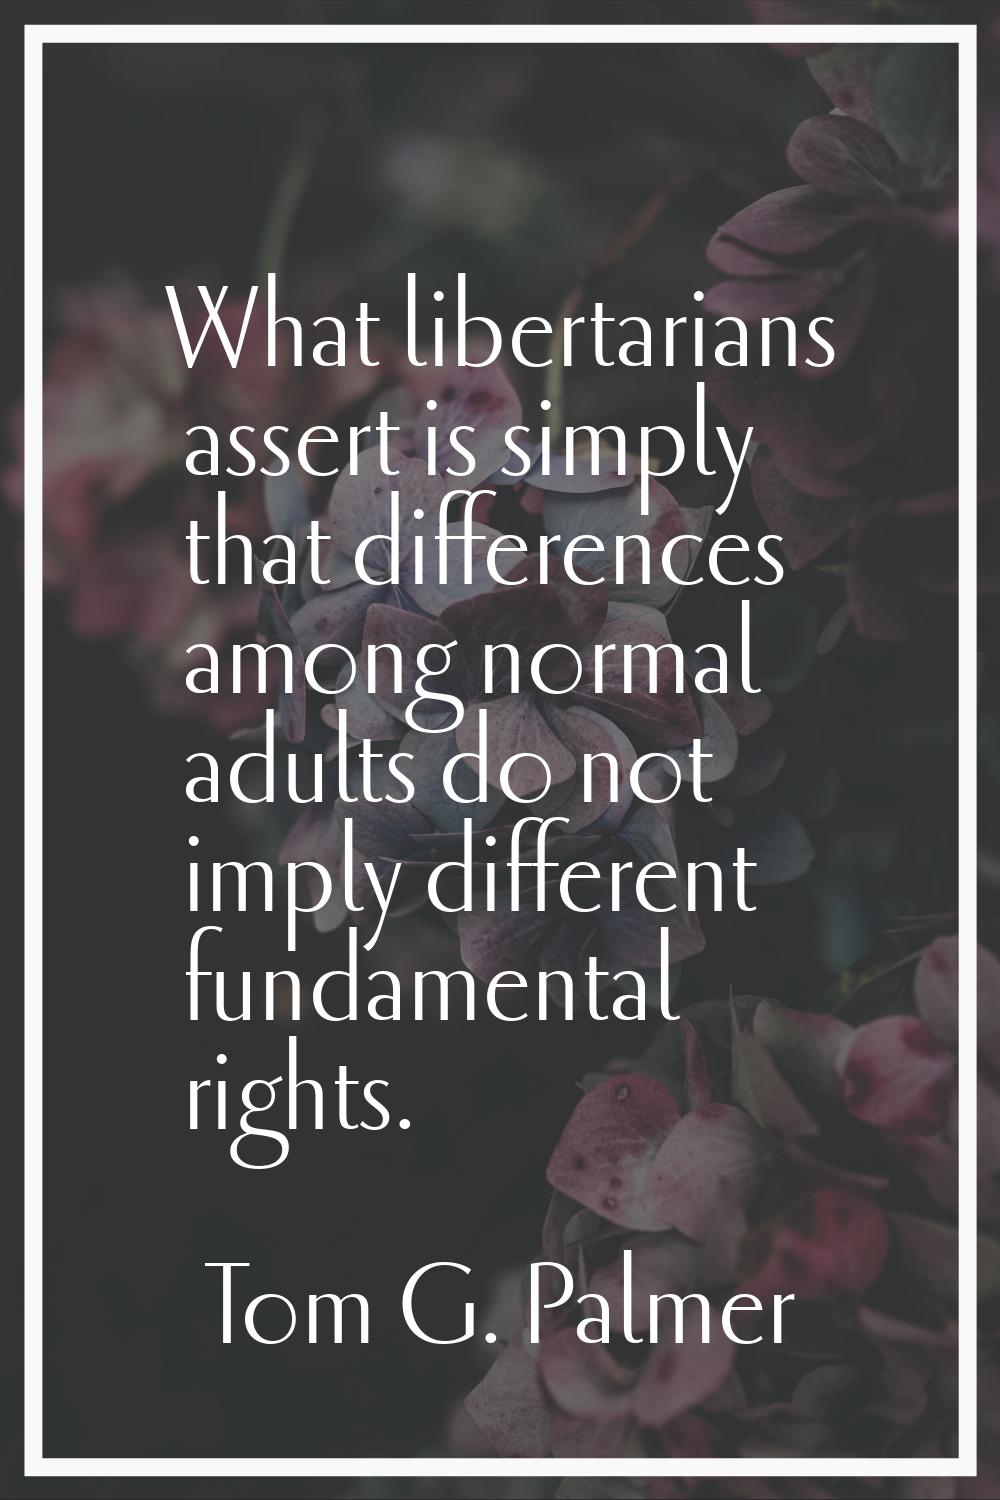 What libertarians assert is simply that differences among normal adults do not imply different fund